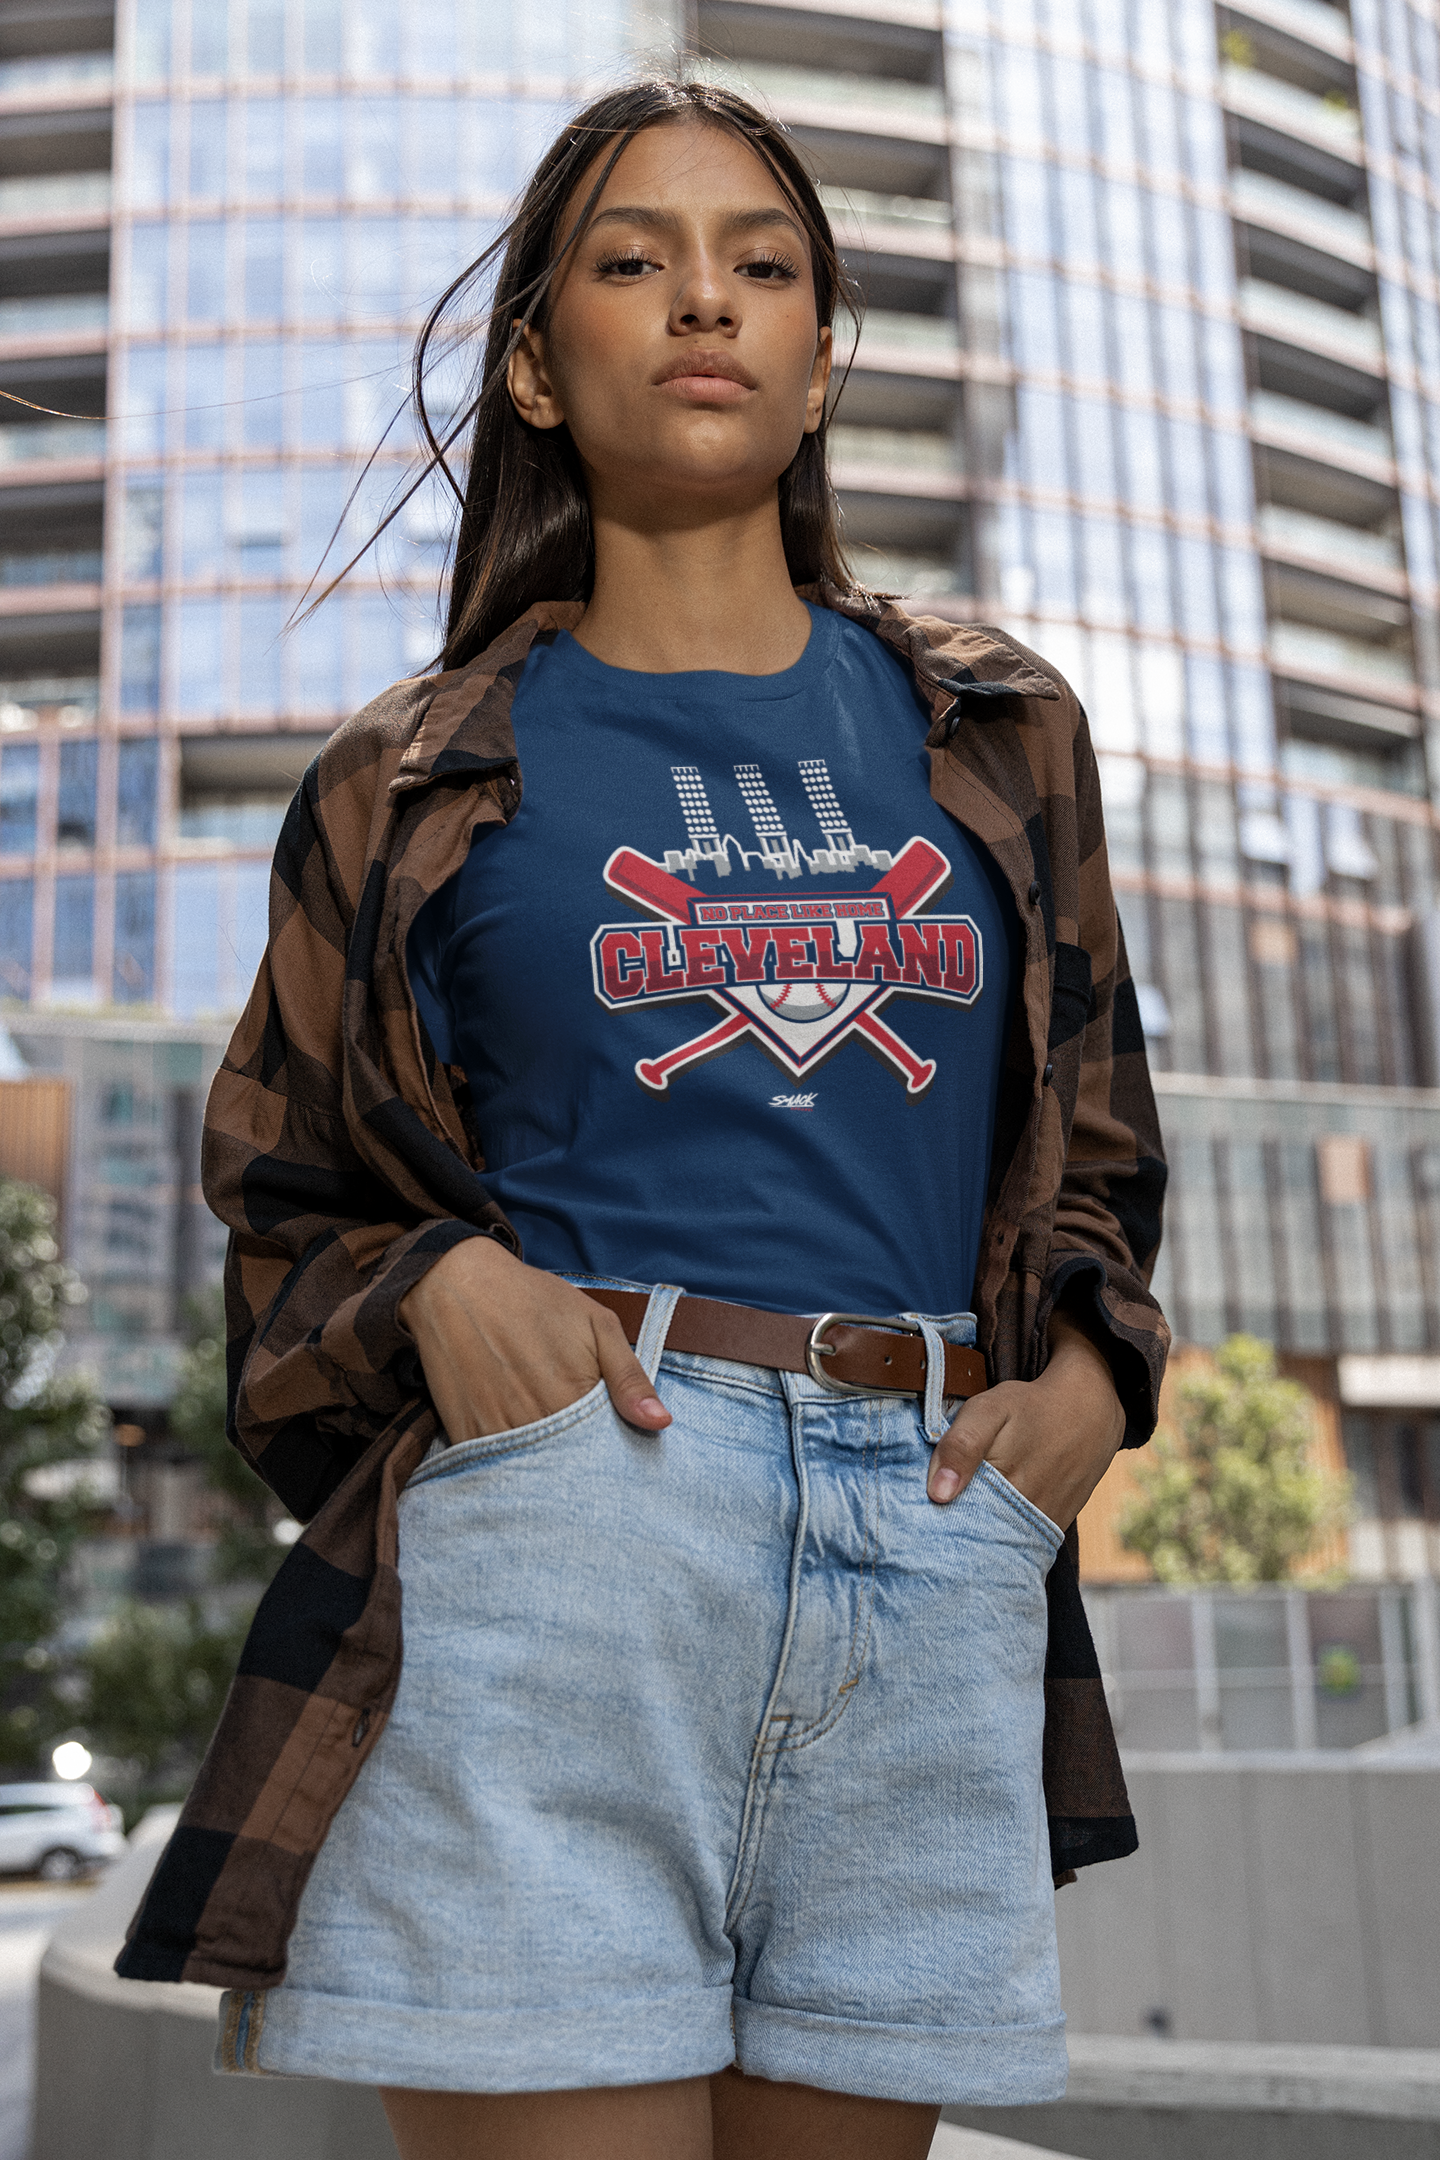 Smack Apparel Boston Baseball Fans. Proud to Be A Yankees Hater Navy T-Shirt (Sm-5X)